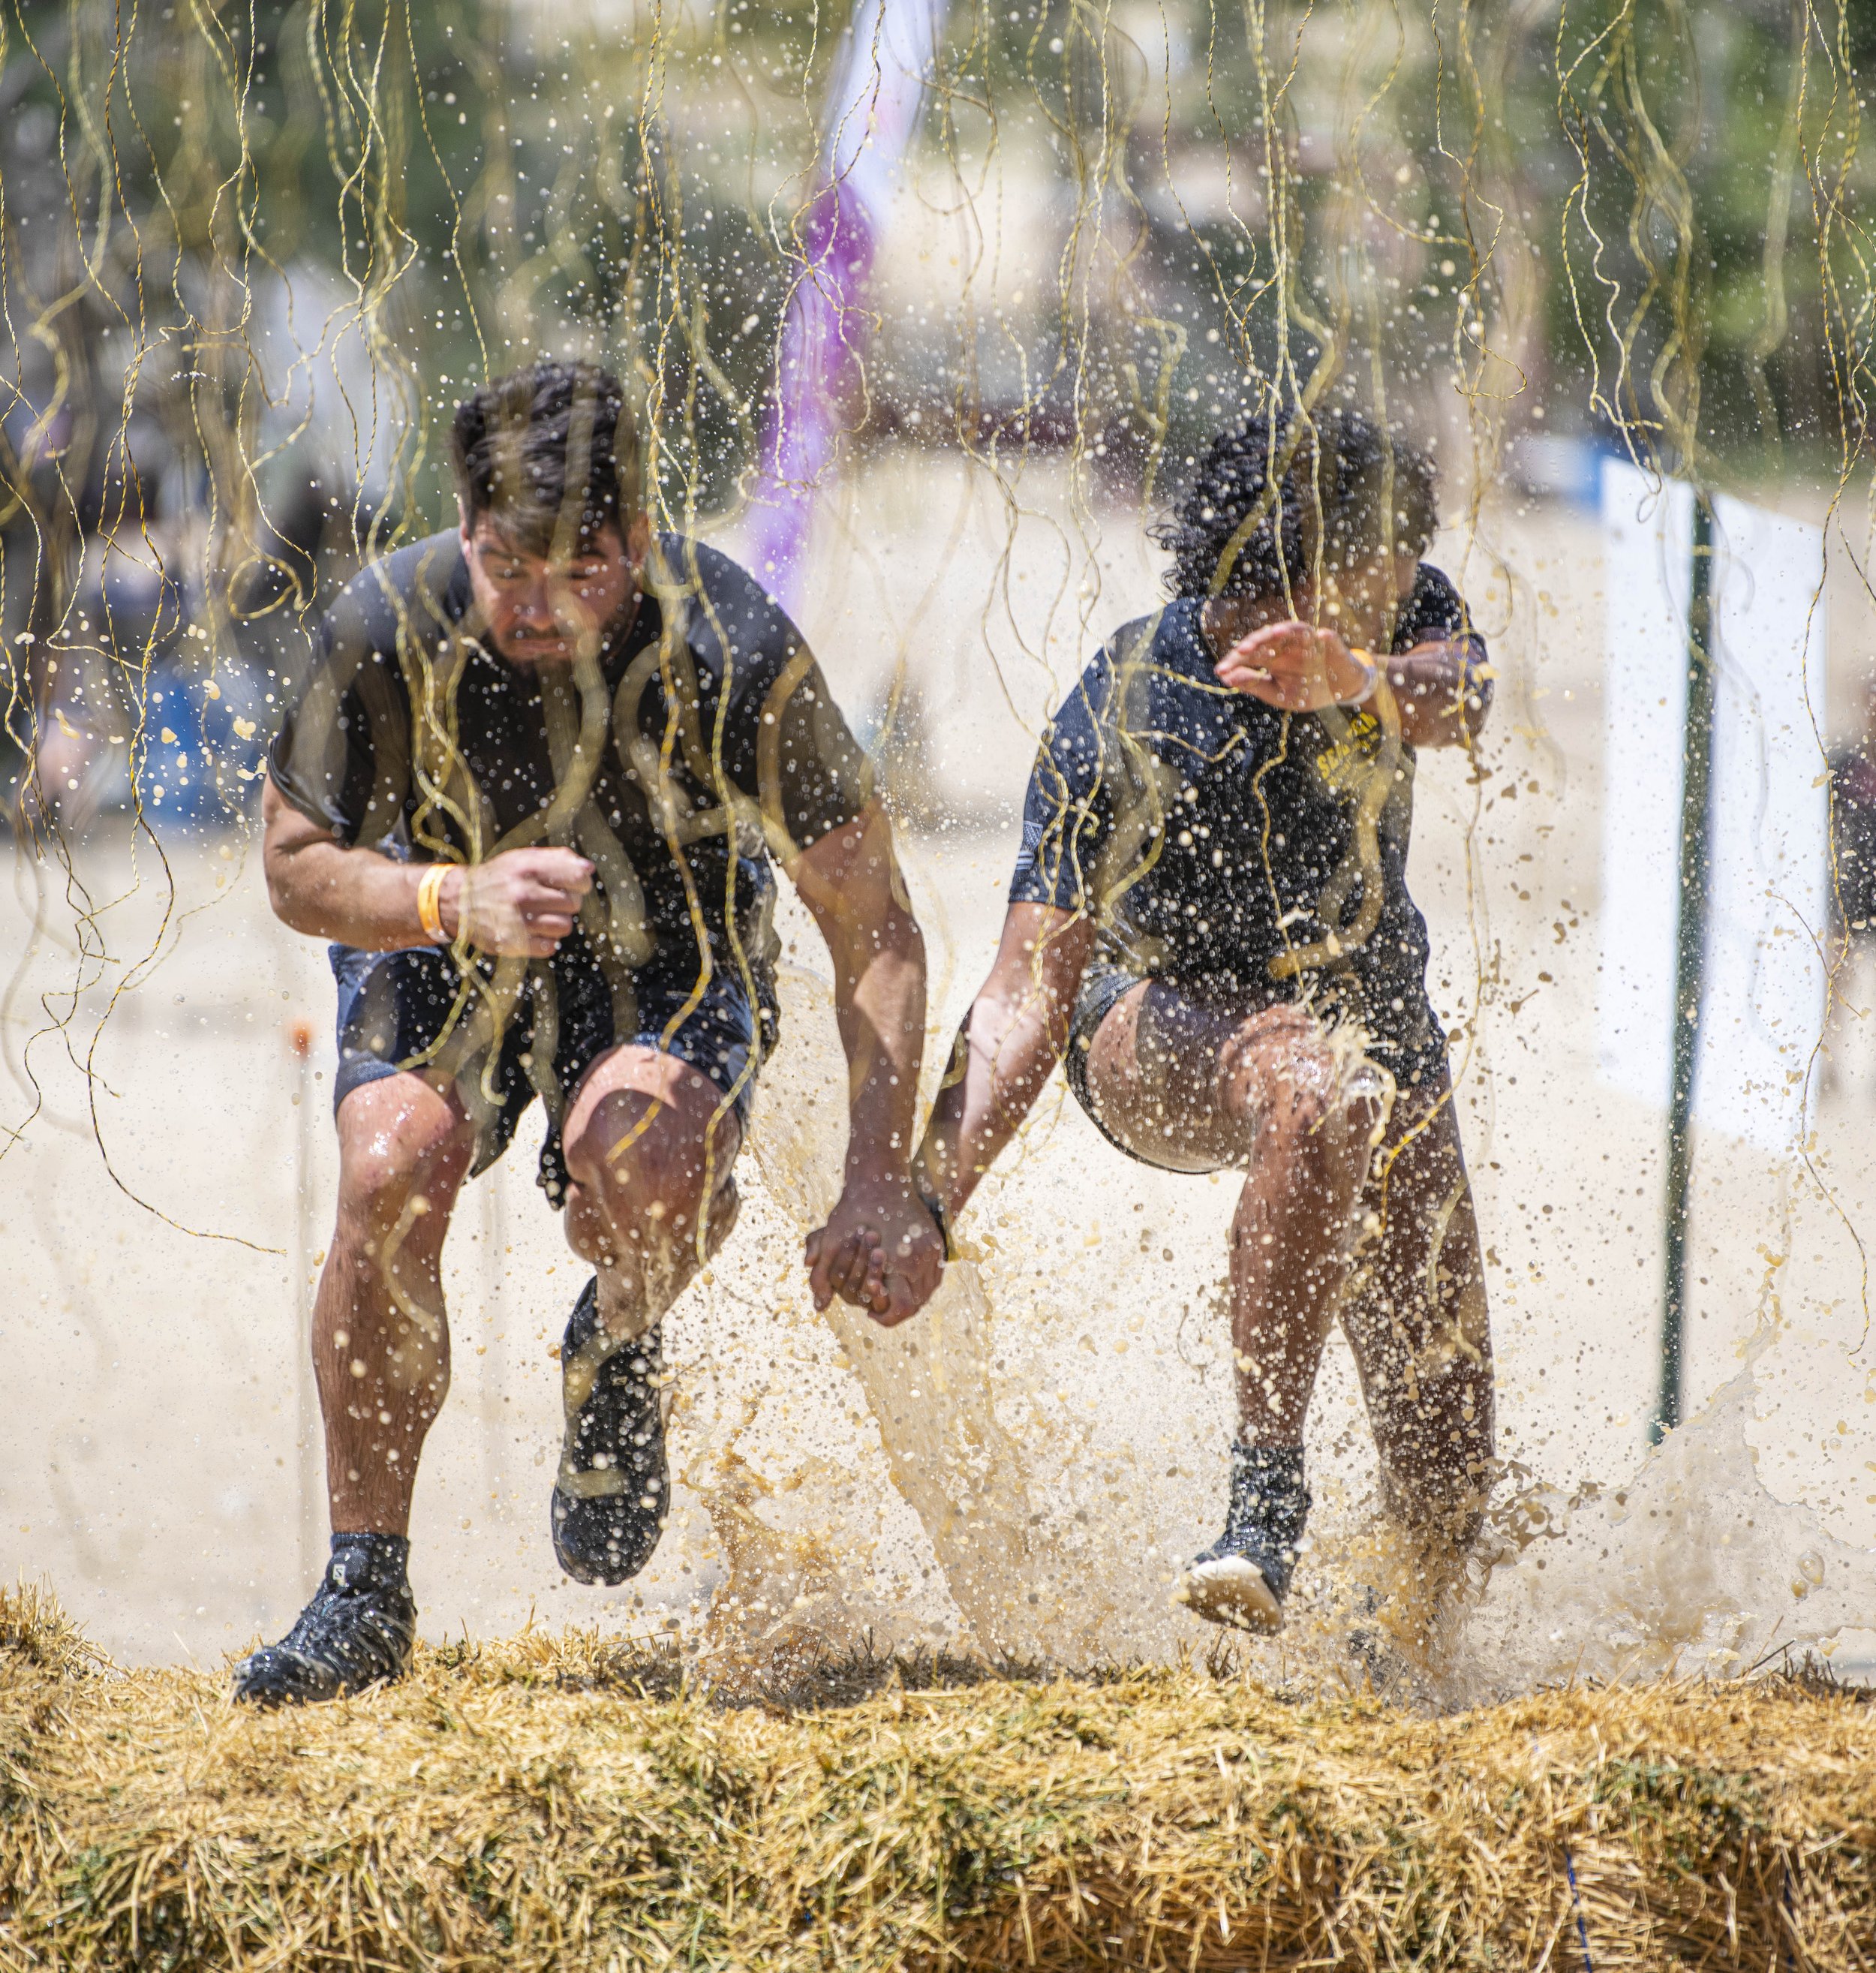  A couple of Tough Mudder Competitors make their way the shock wire pit as they hold hands at the Tough Mudder event held in San Bernadino on April 9, 2022. (Jon Putman | The Corsair) 